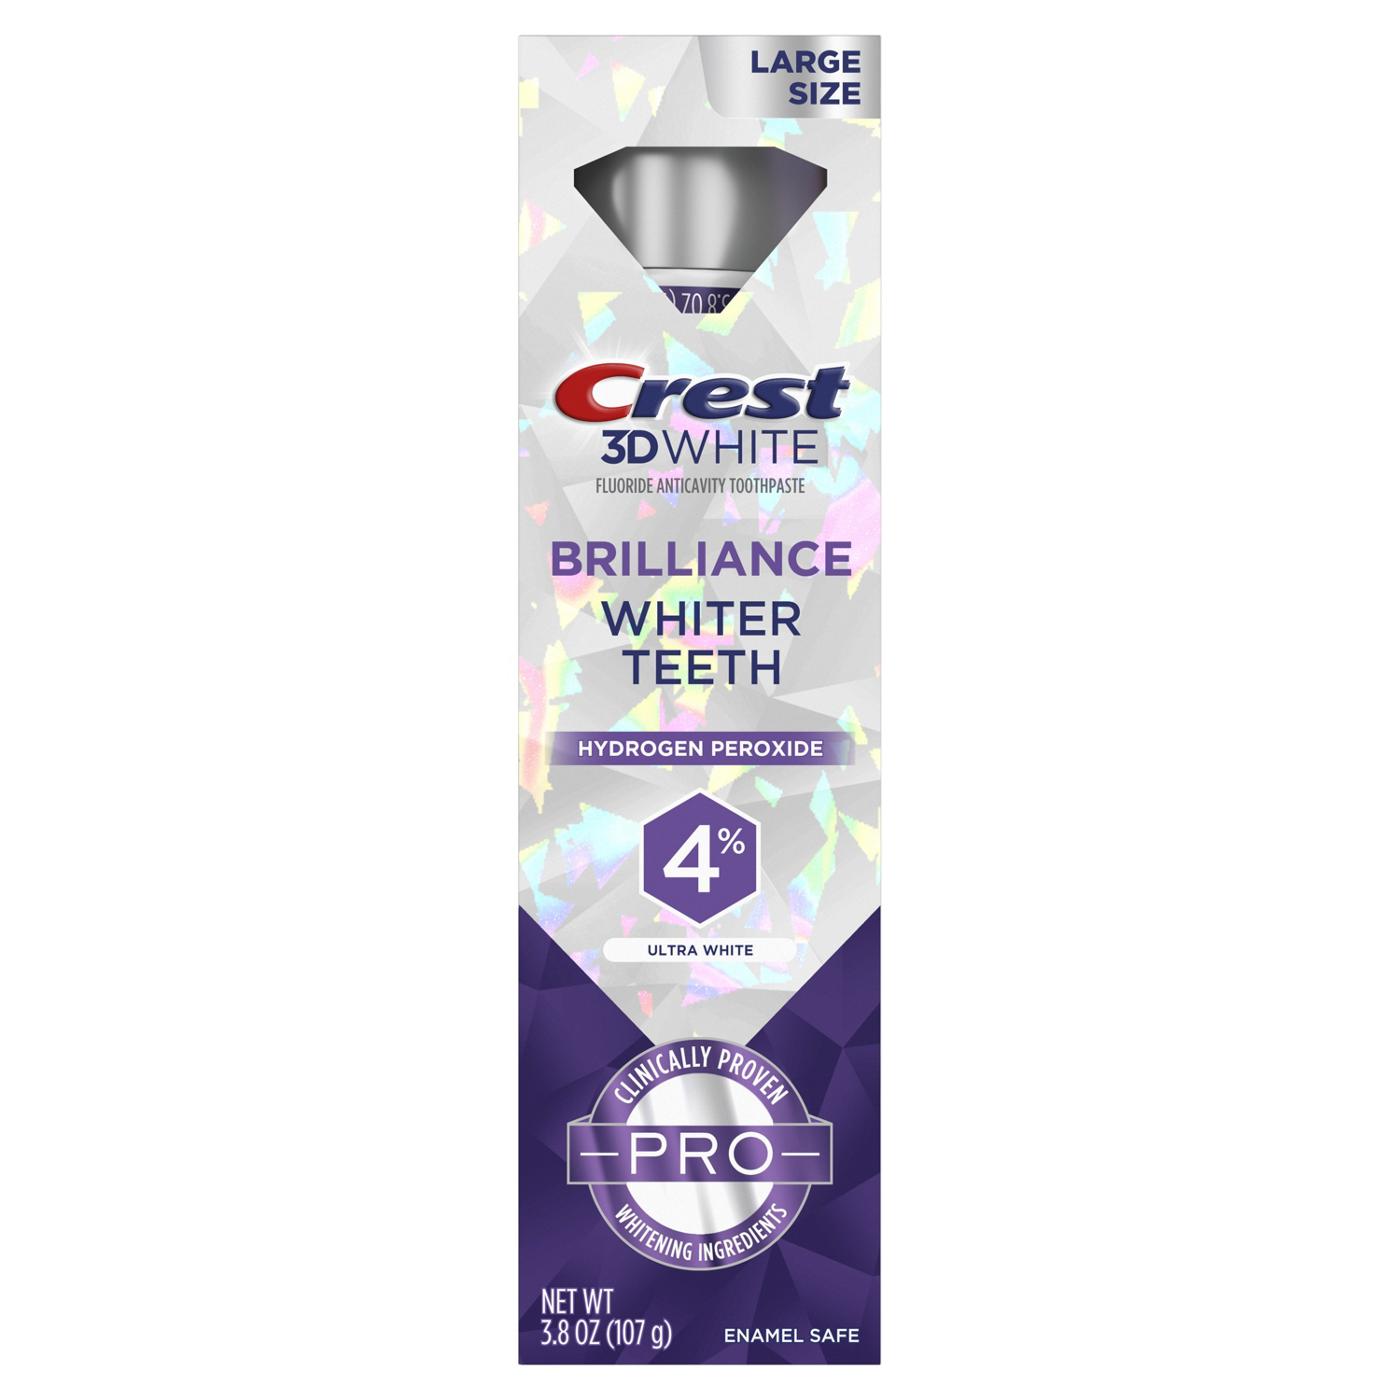 Crest 3D White Brilliance Toothpaste - Ultra White; image 1 of 7